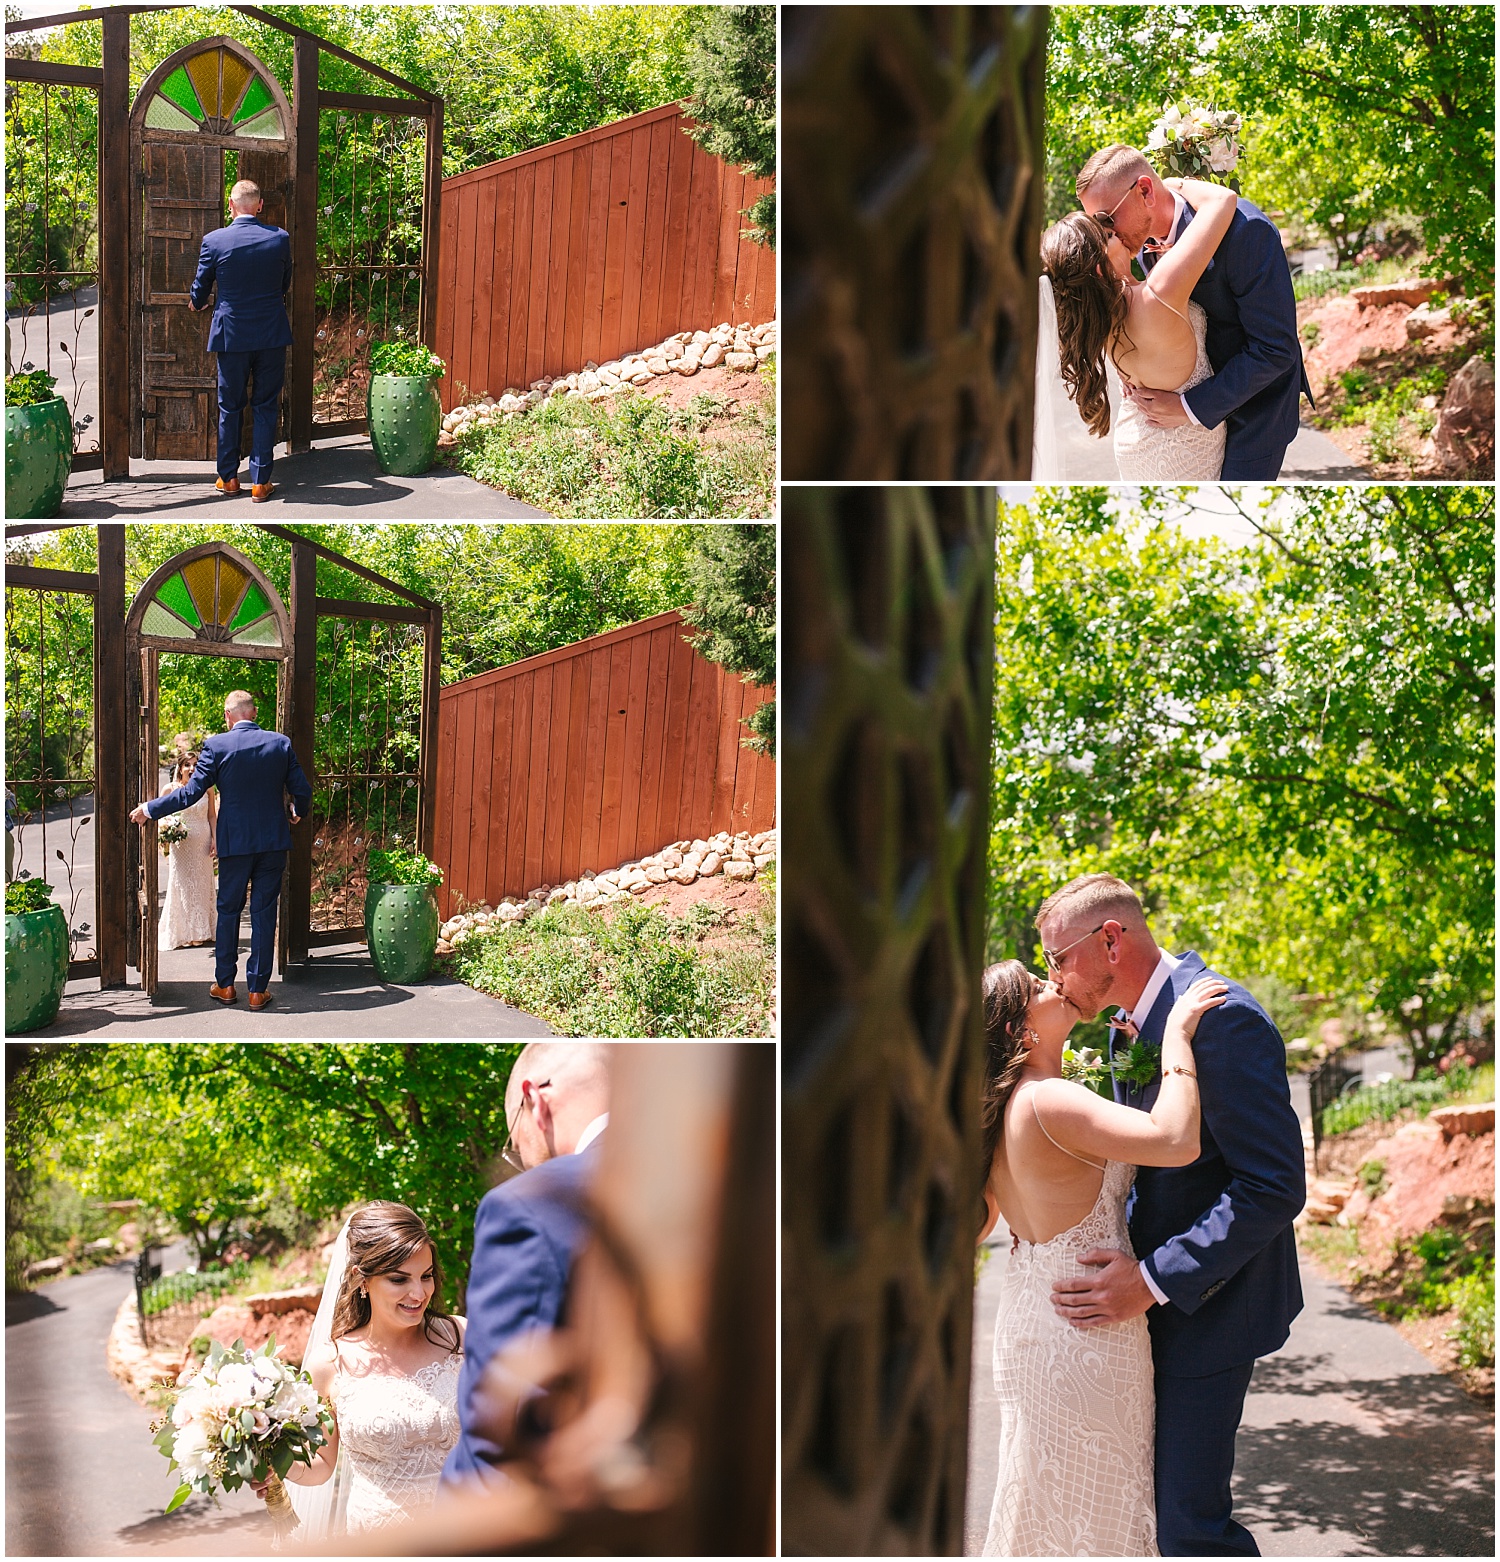 Bride and groom's first look in the garden at Craftwood Inn in Manitou Springs